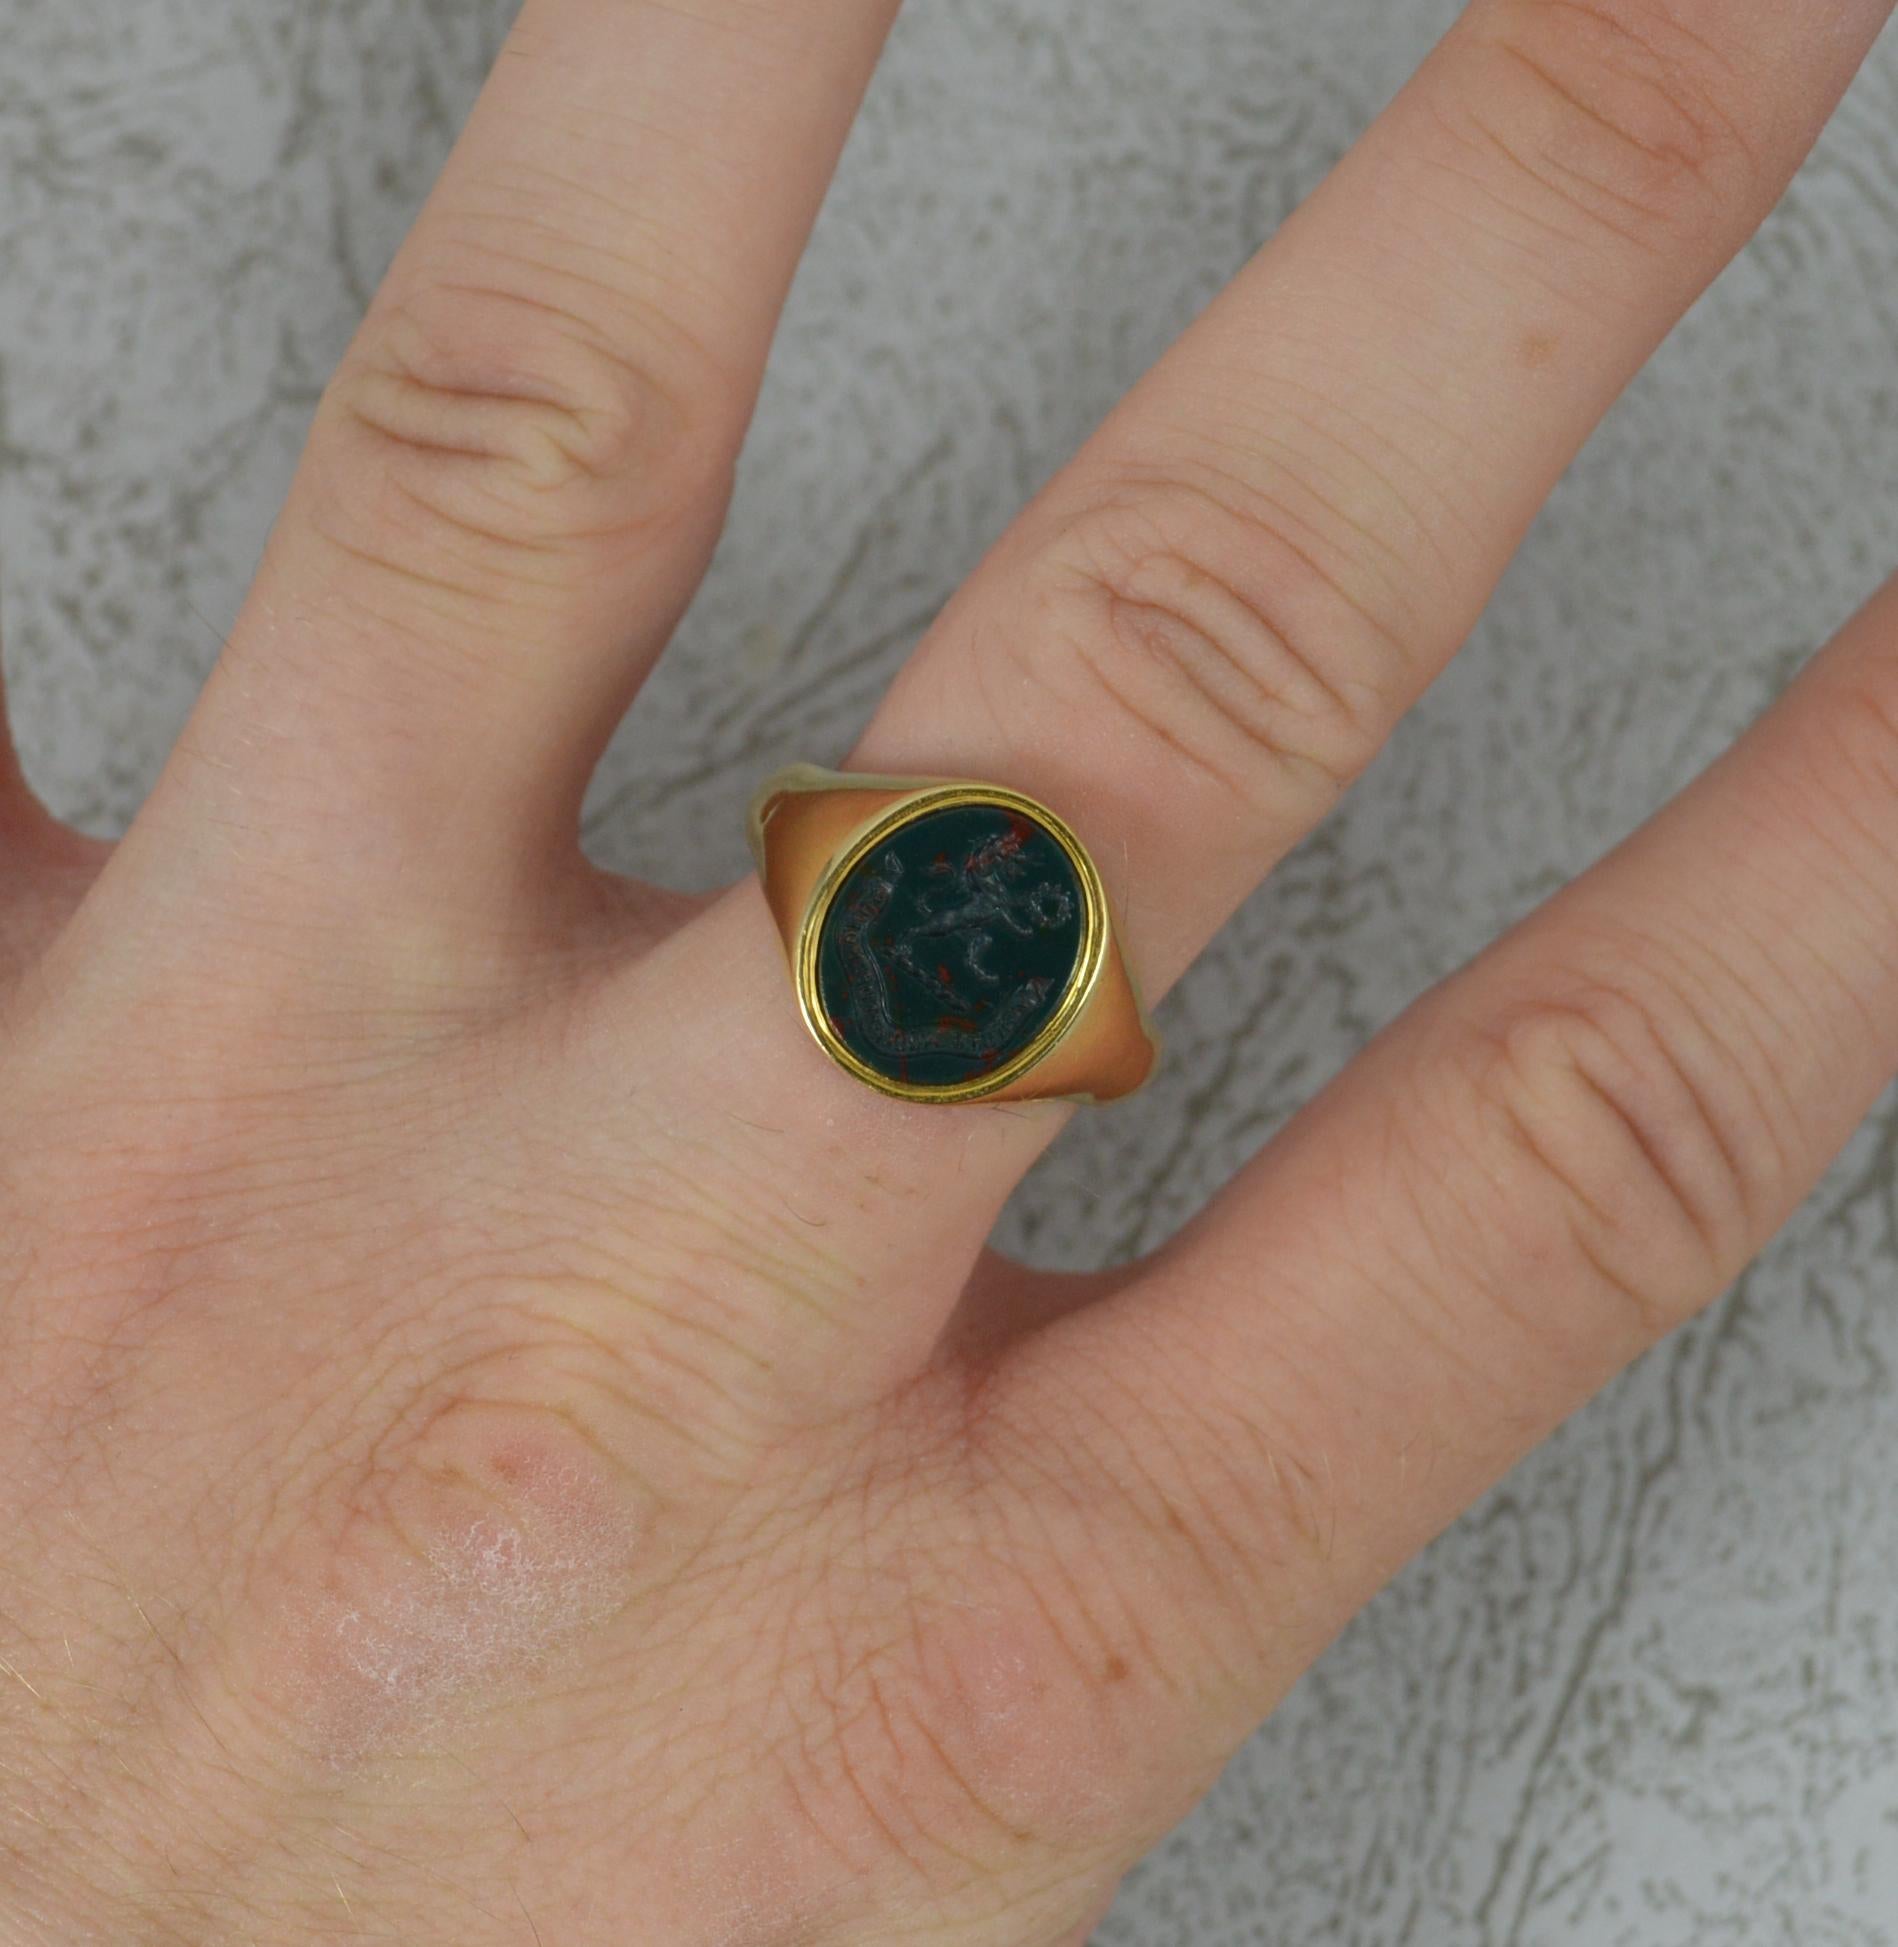 A stunning antique signet ring.
Solid 18 carat yellow gold example.
Designed with an oval shaped bloodstone. 10.6mm x 12.5mm approx.
Expertly hand carved depicting a lion passant holding a wreath. Below reads the moto Virtute Acquiritur Honos. The